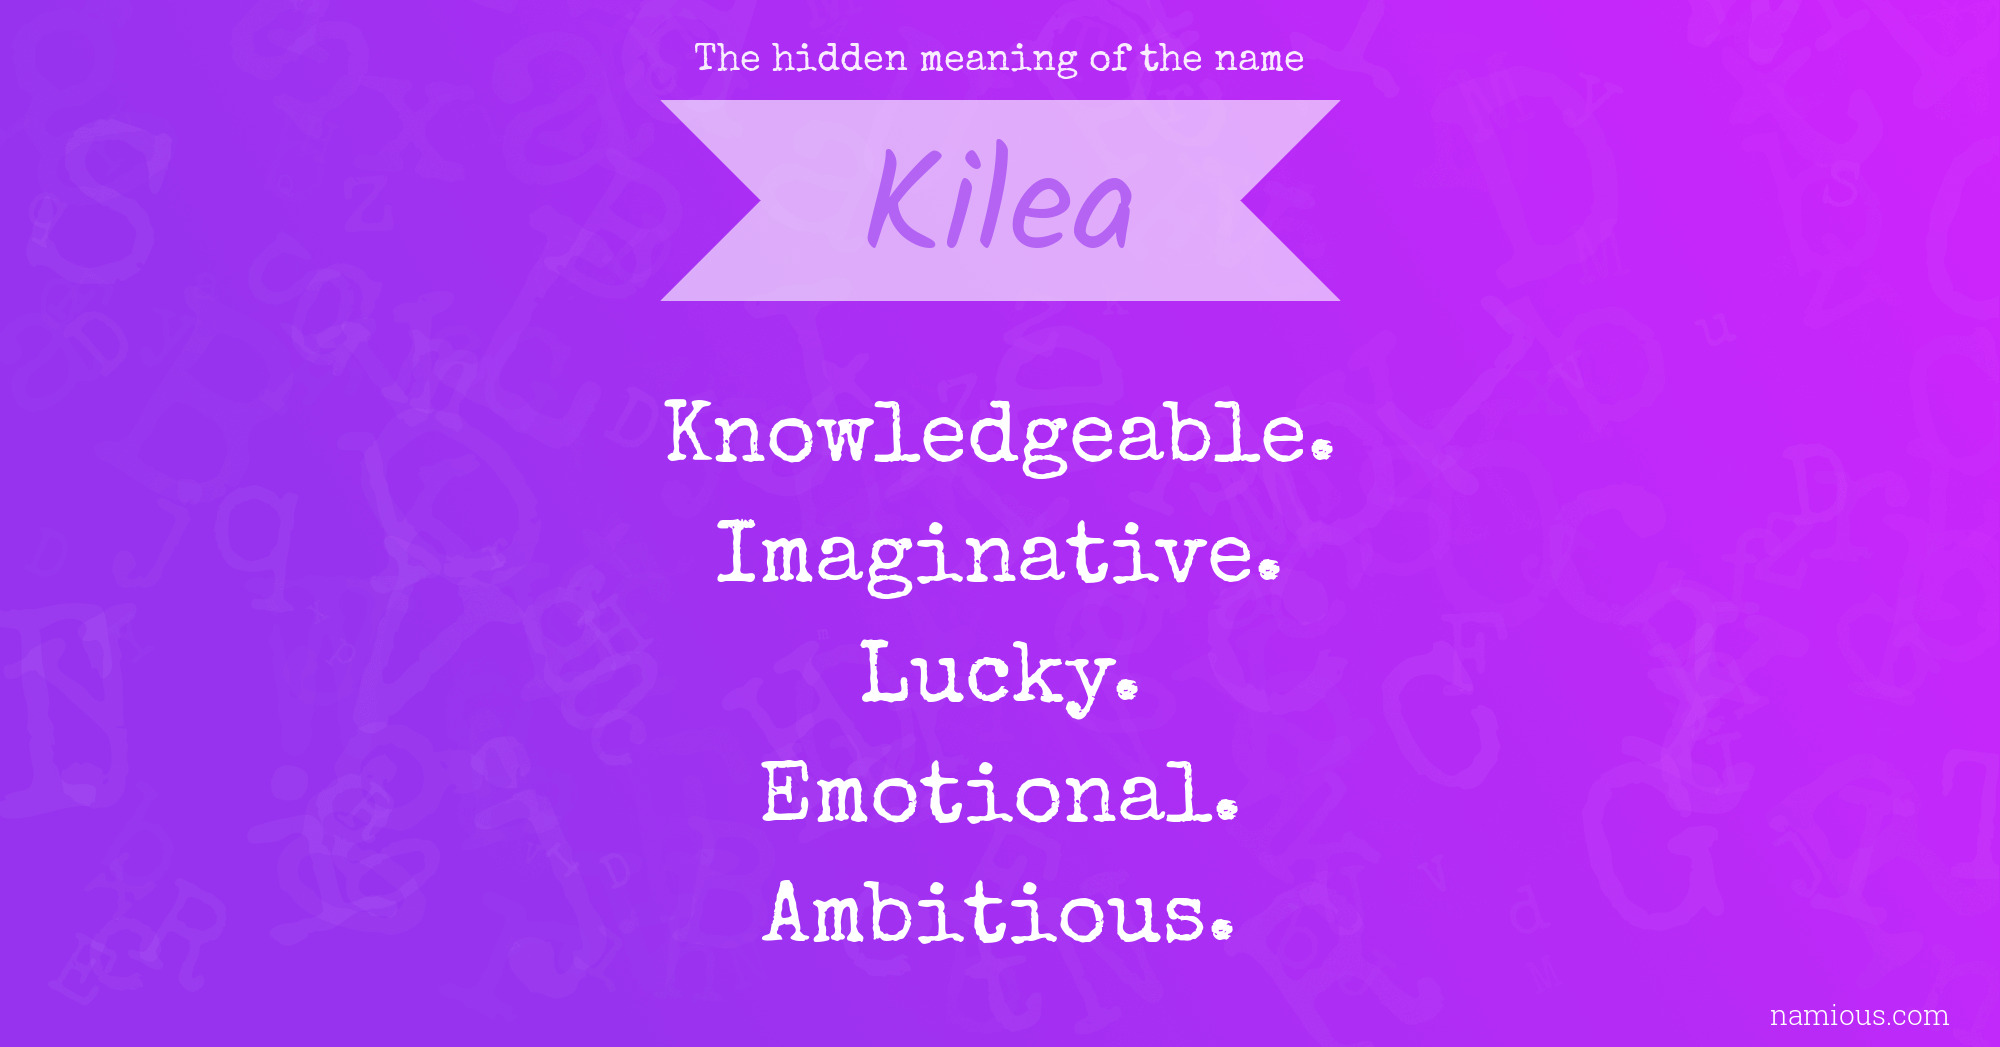 The hidden meaning of the name Kilea